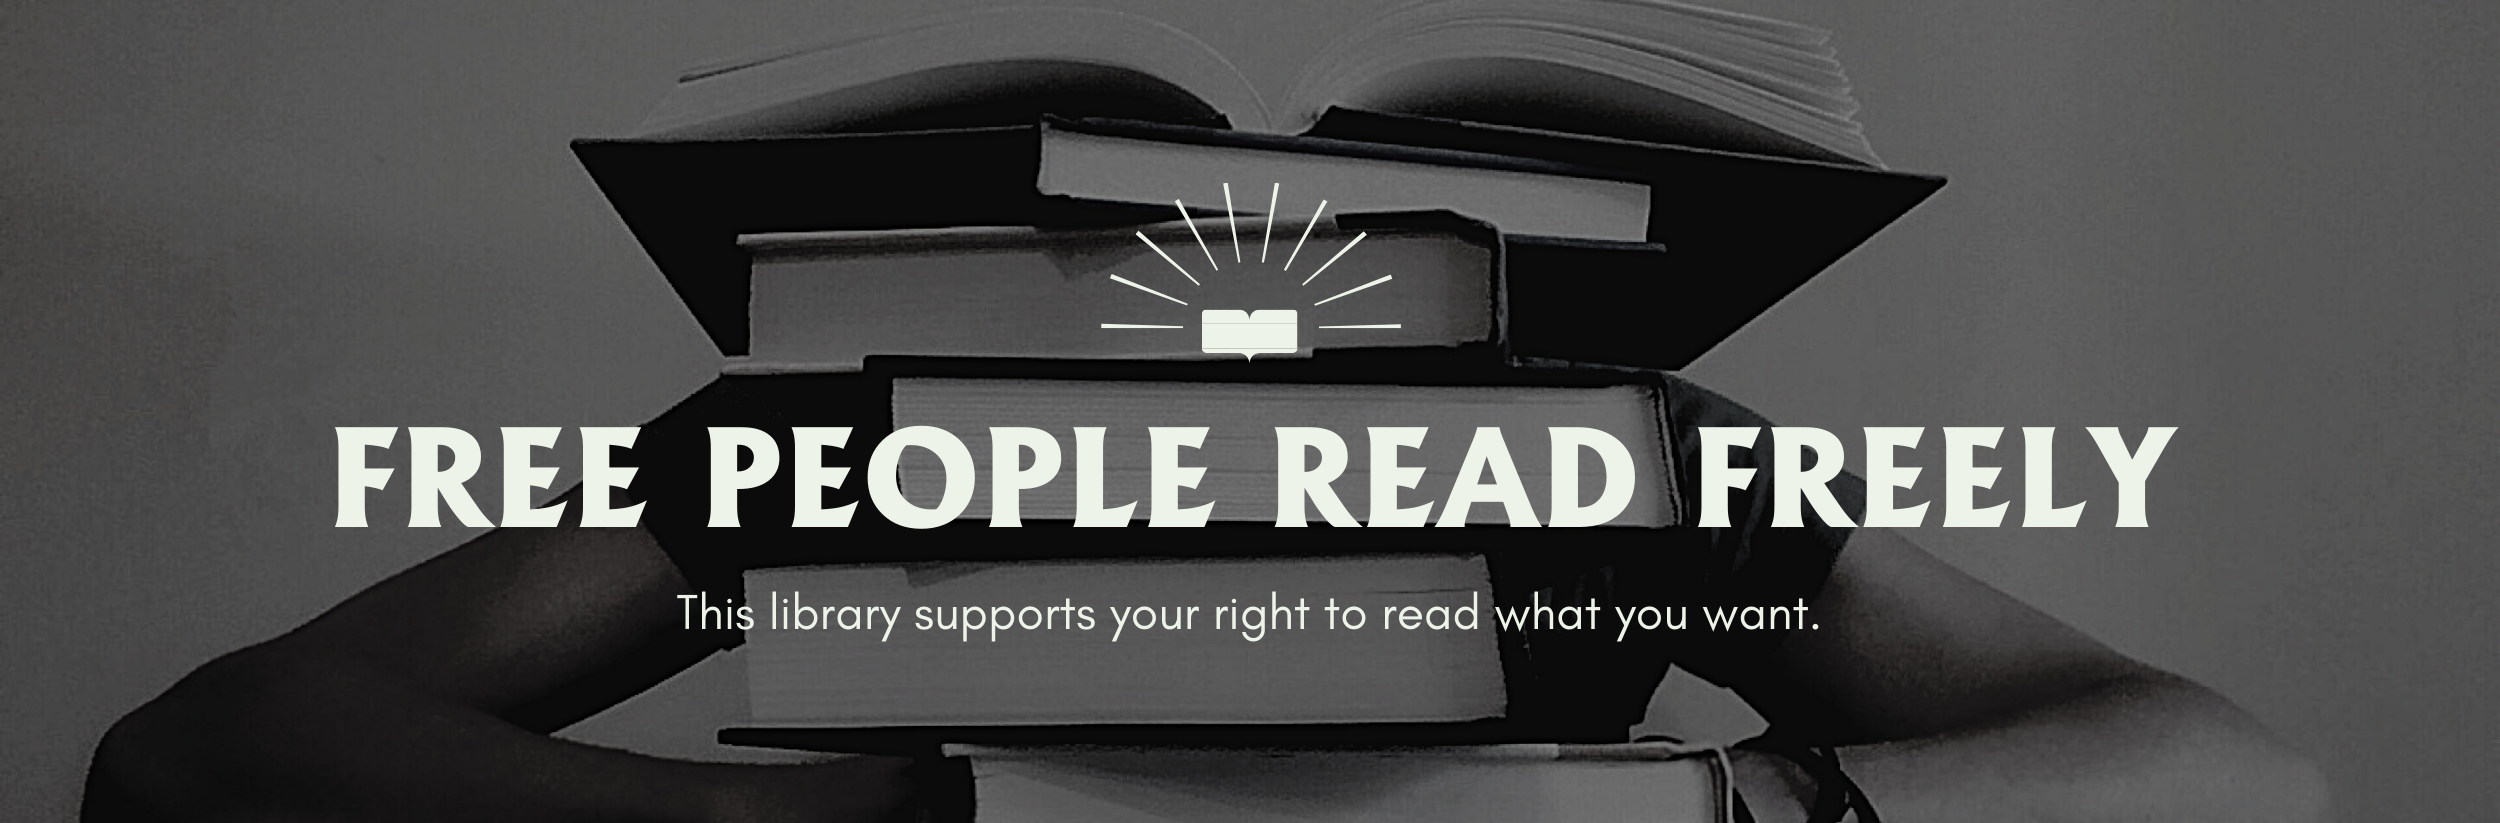 Image for "Free People Read Freely"